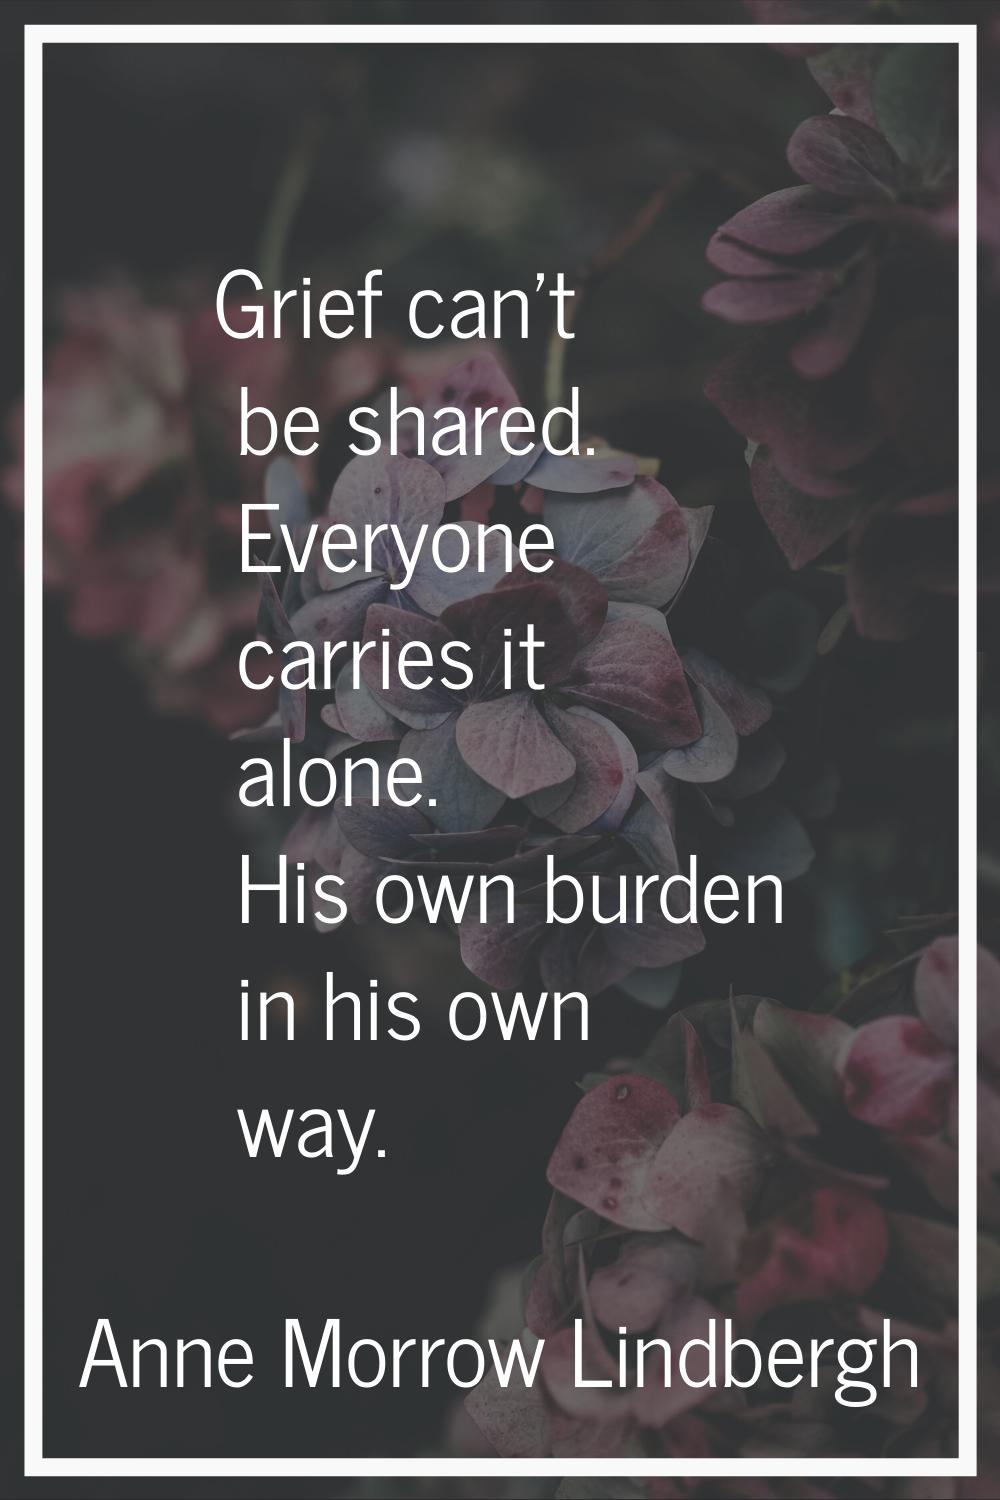 Grief can't be shared. Everyone carries it alone. His own burden in his own way.